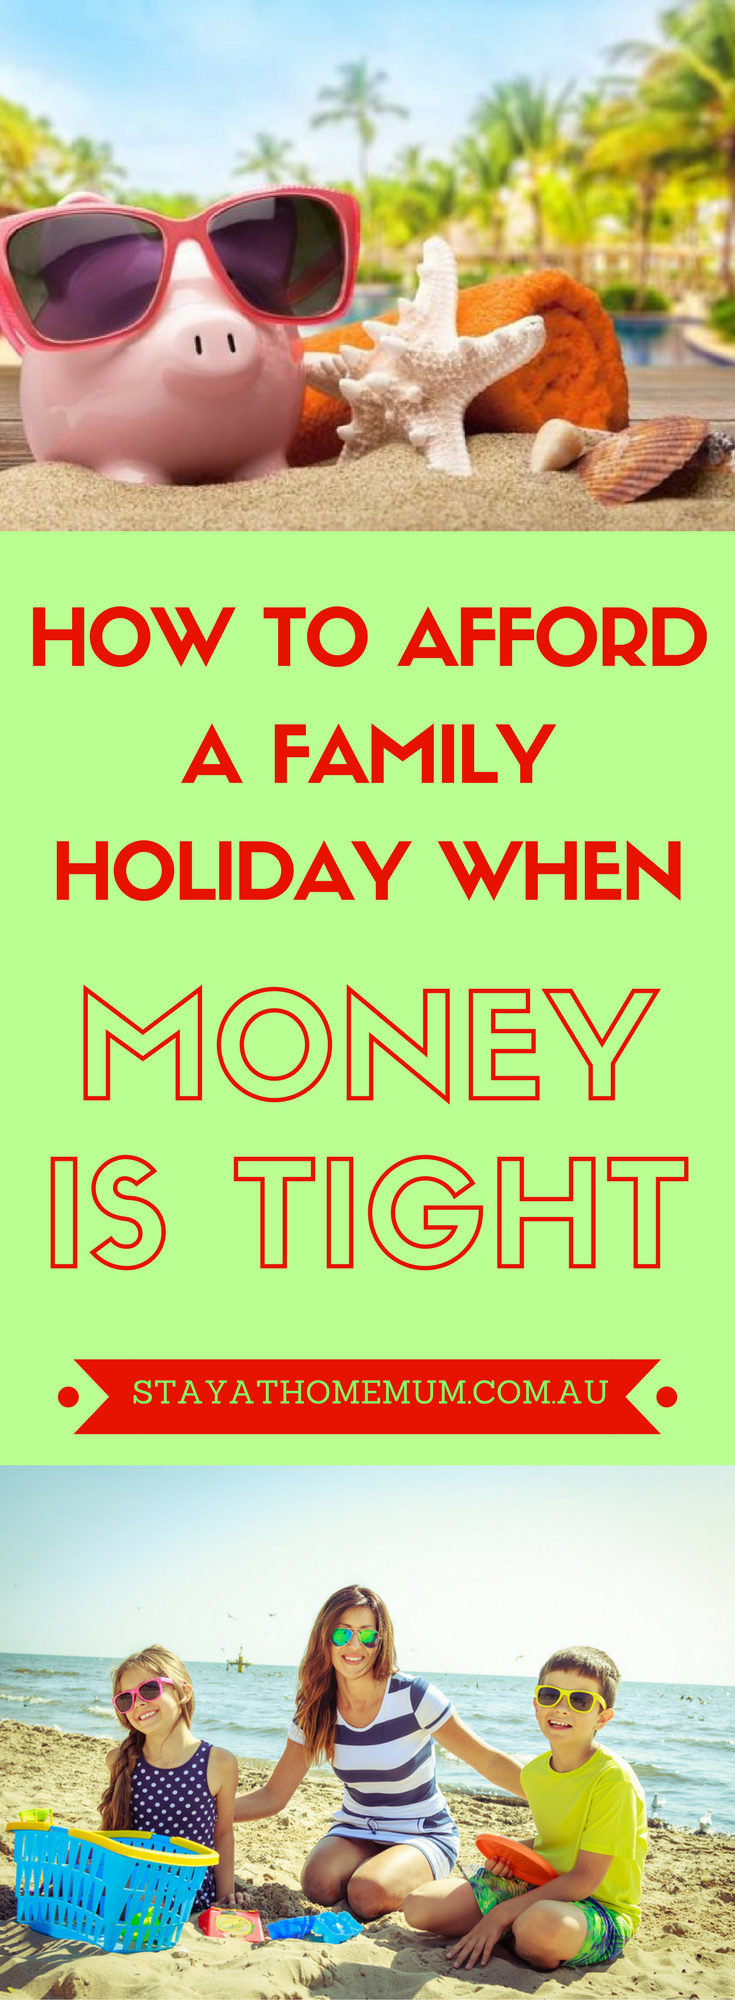 How to Afford a Family Holiday When Money Is Tight